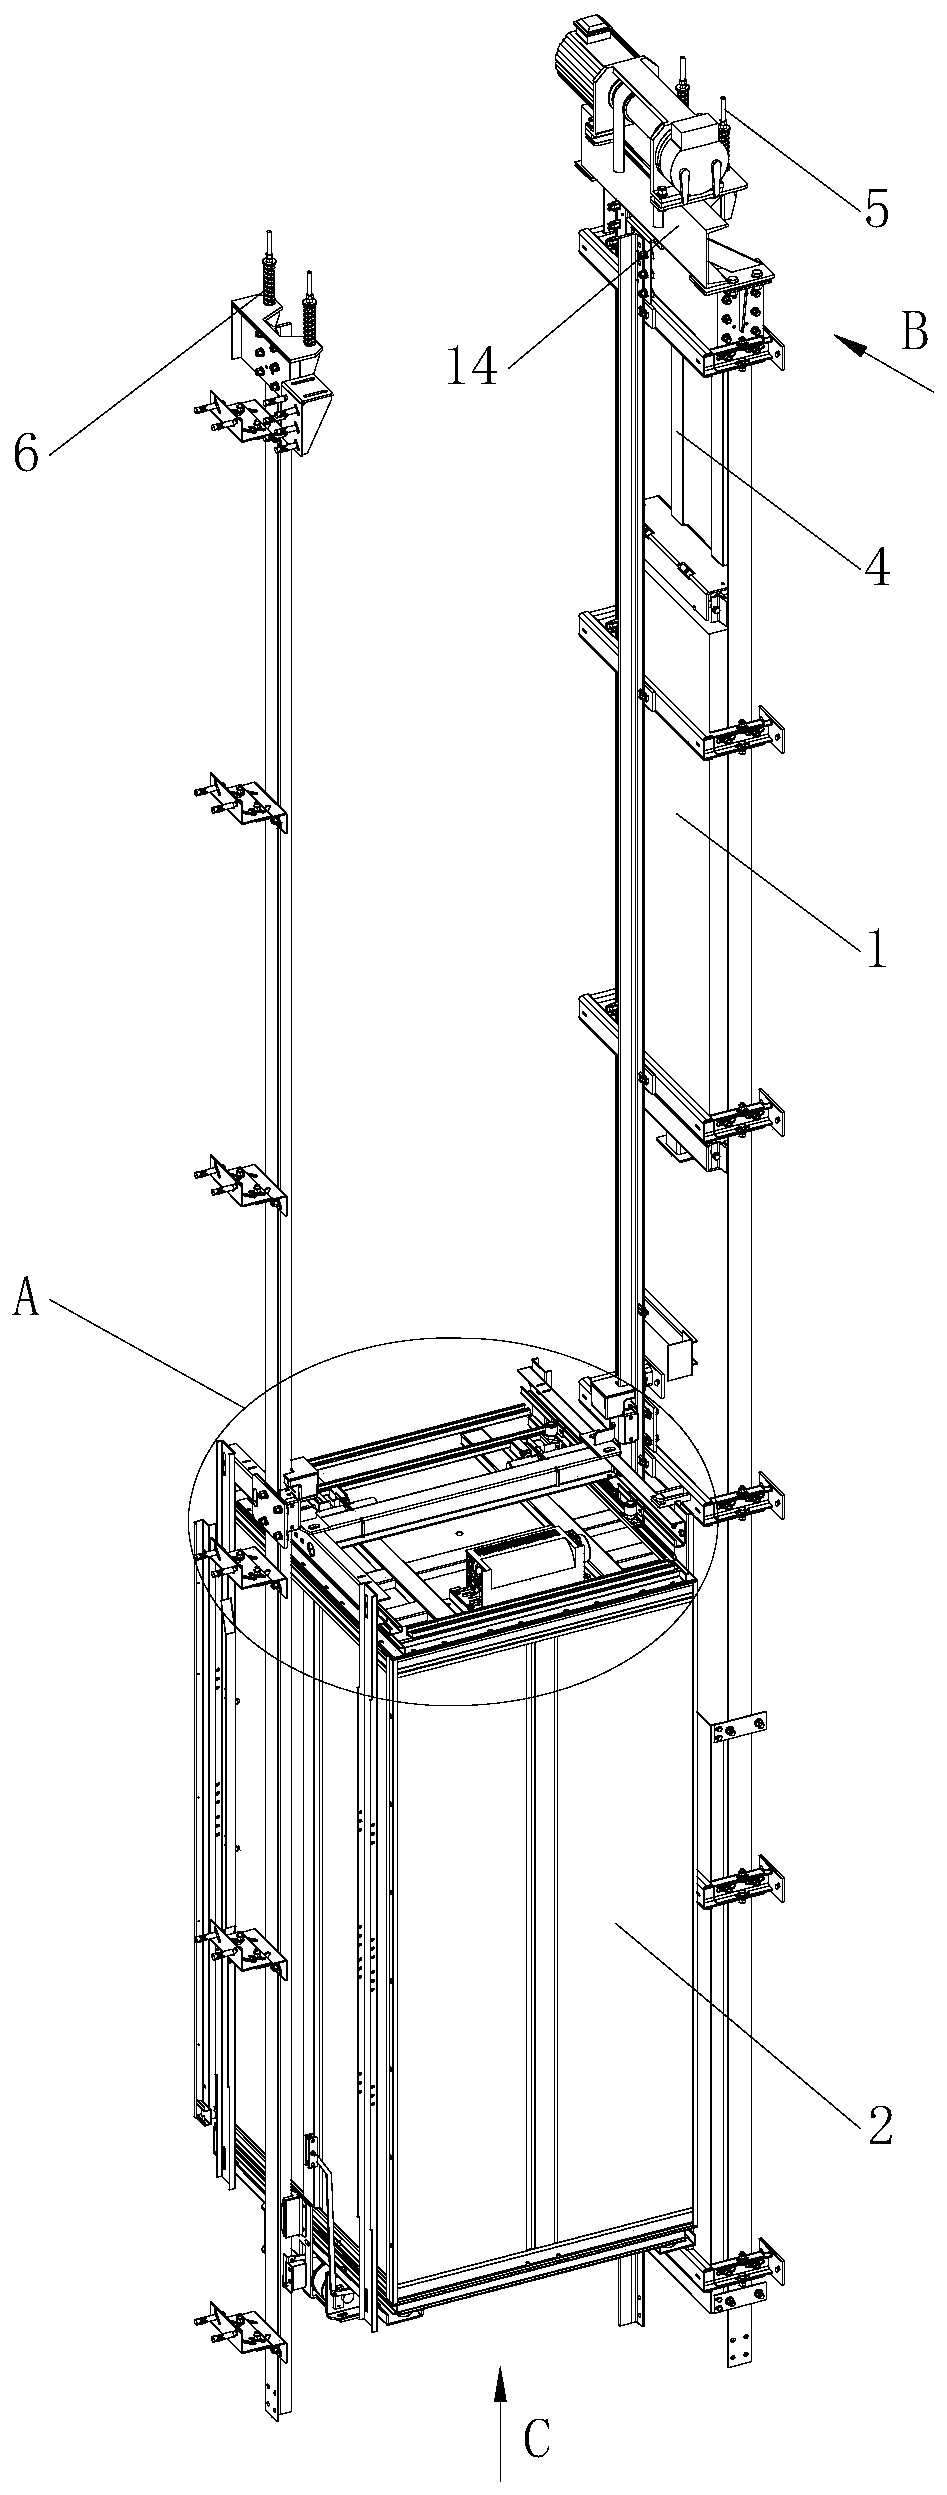 Car-frame-free elevator driven by traction steel belt